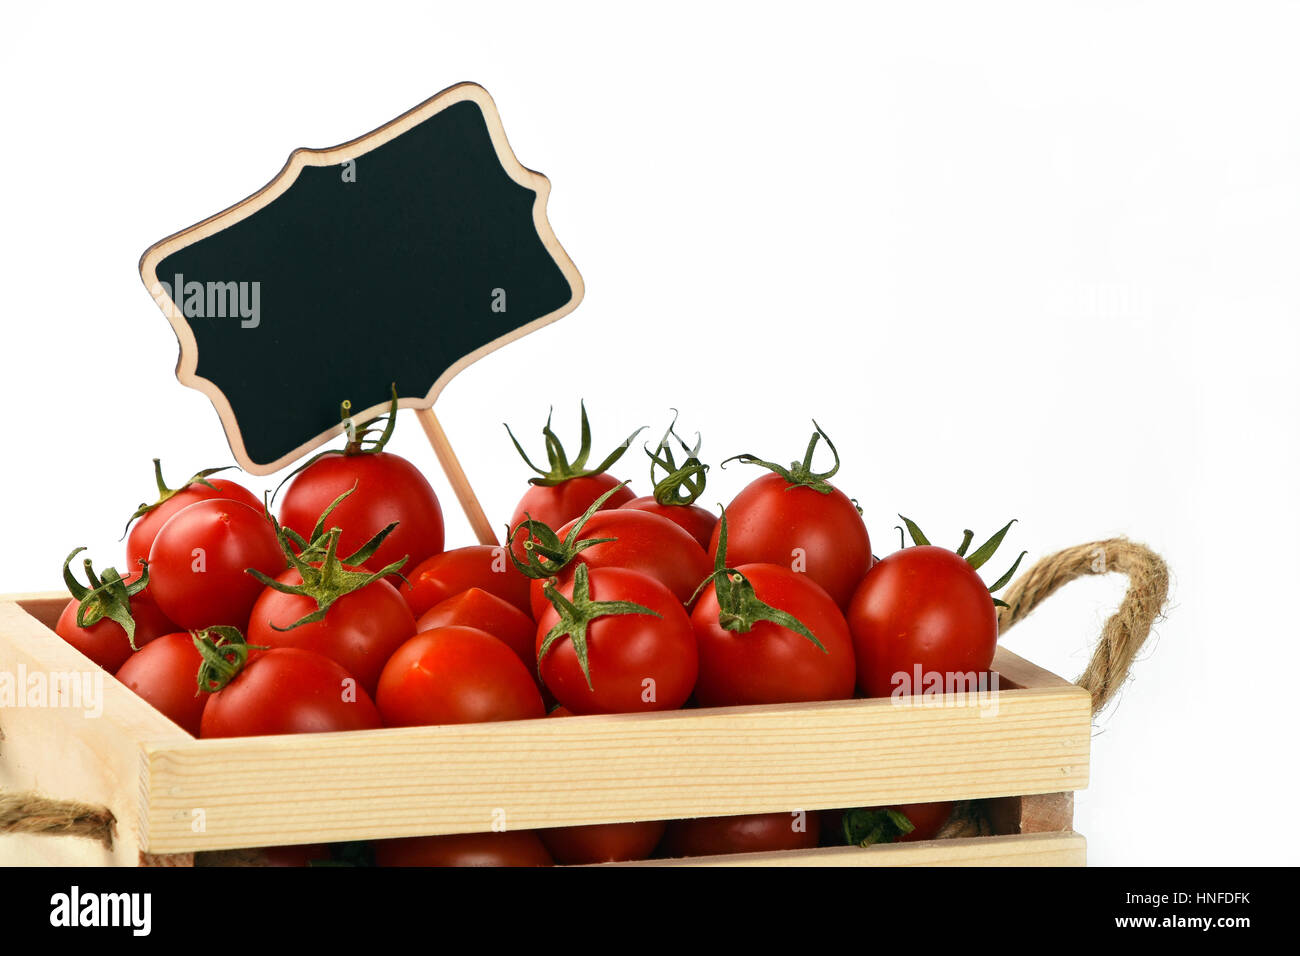 Fresh red ripe cherry tomatoes in small wooden box with black chalkboard price sign tag over white background Stock Photo